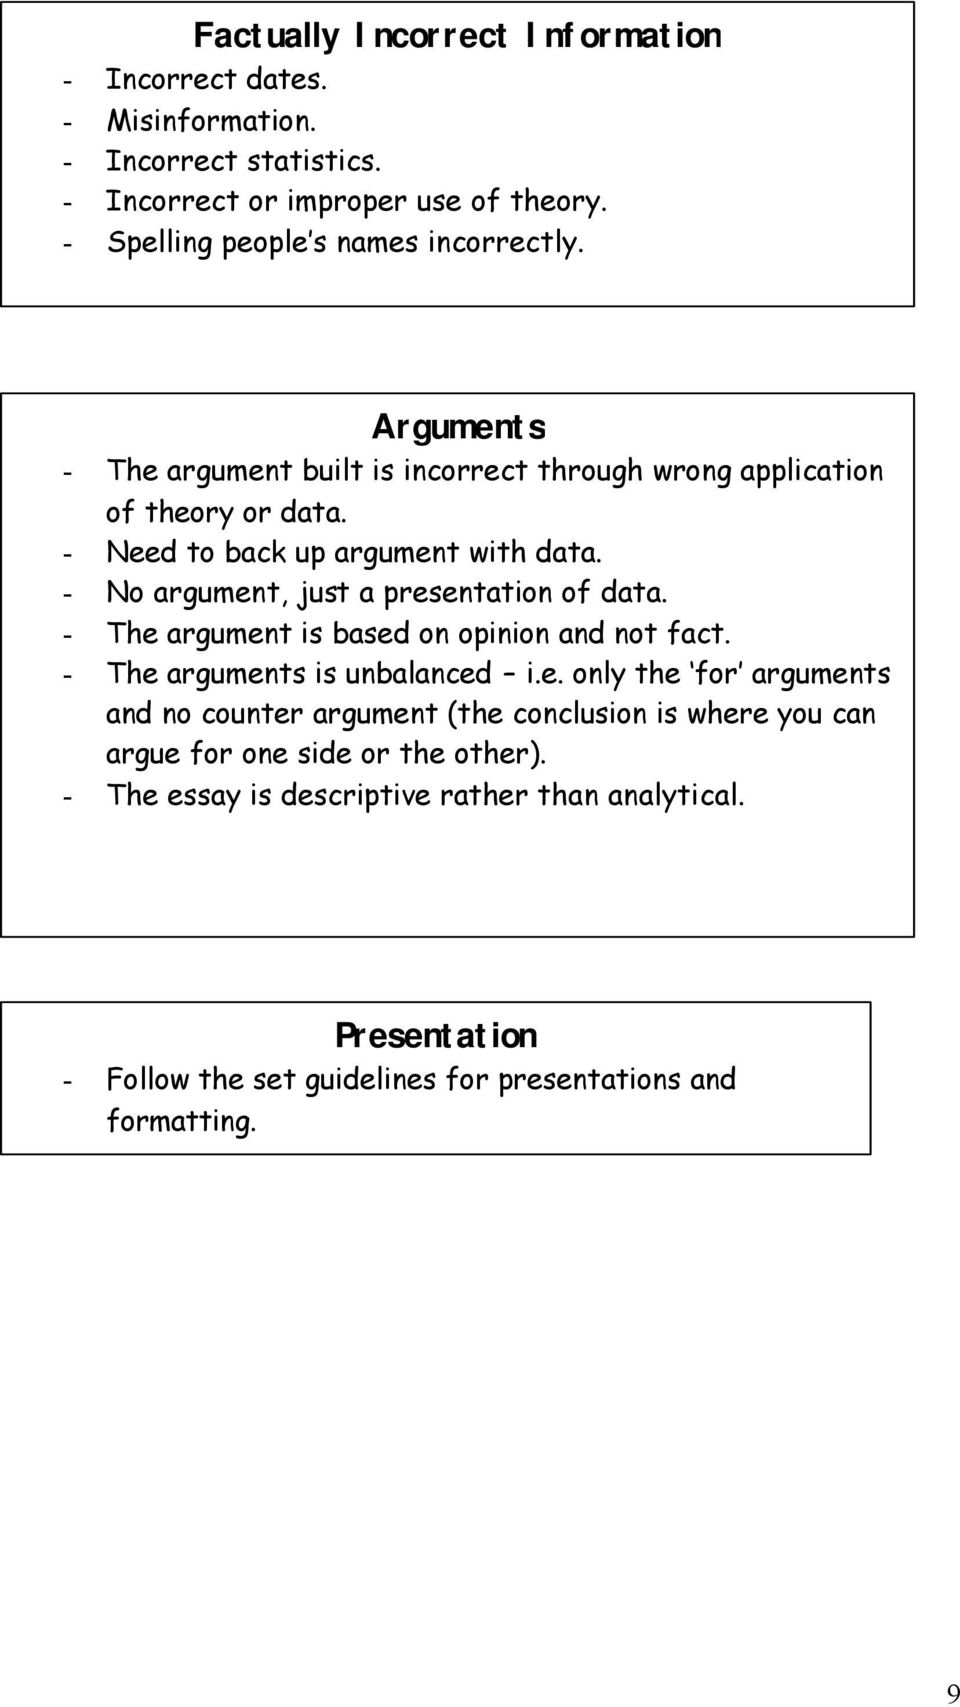 - No argument, just a presentation of data. - The argument is based on opinion and not fact. - The arguments is unbalanced i.e. only the for arguments and no counter argument (the conclusion is where you can argue for one side or the other).